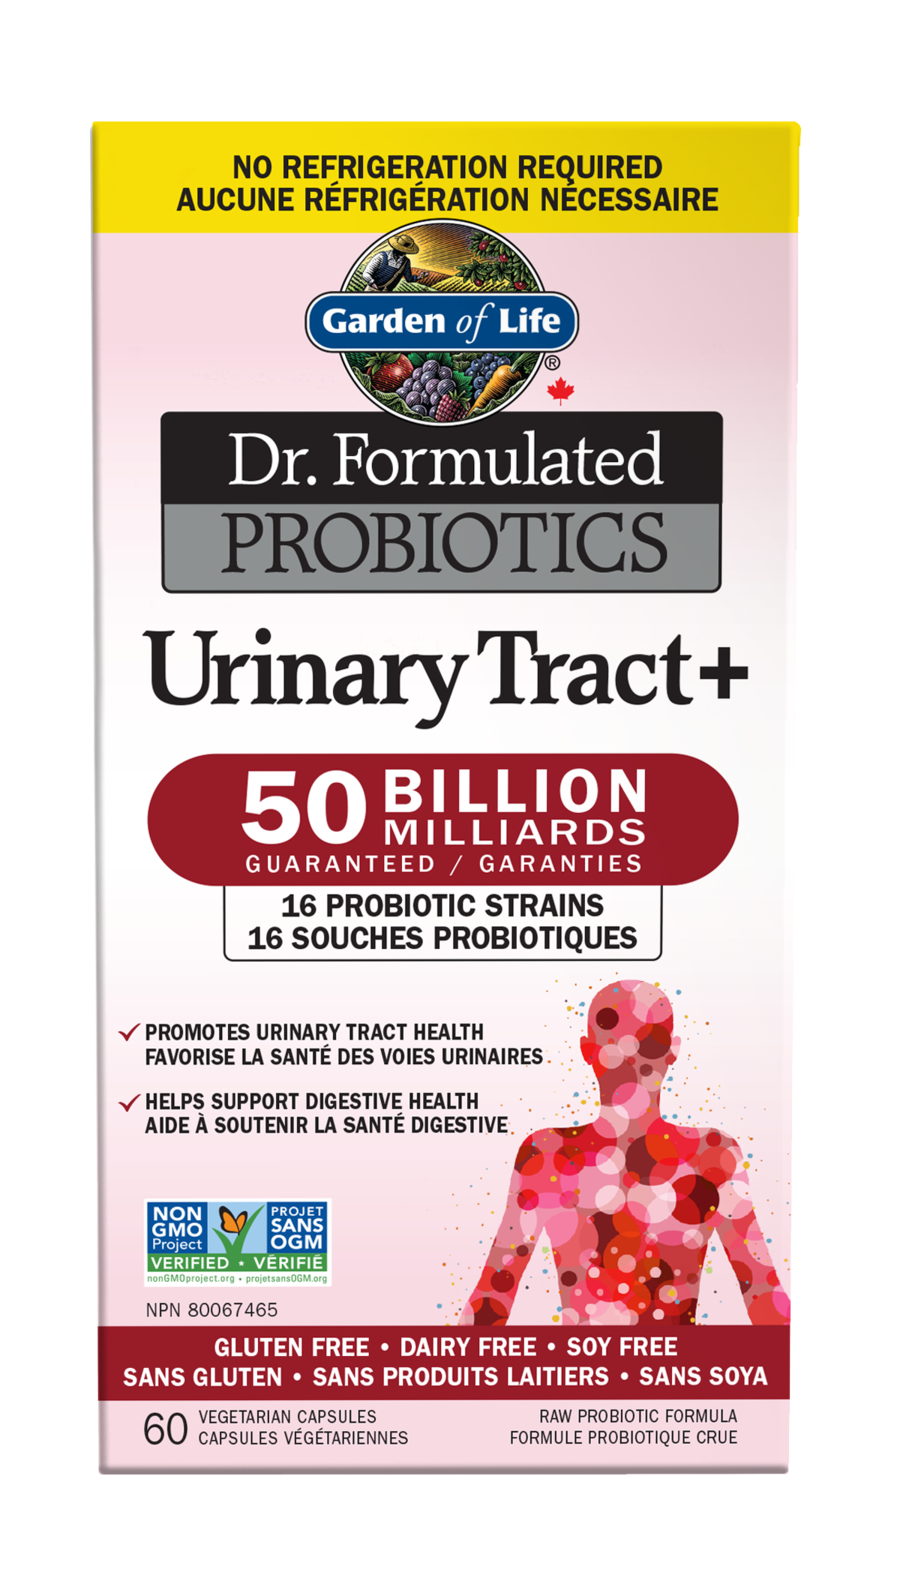 Garden of Life Dr. Formulated Probiotics Urinary Tract+